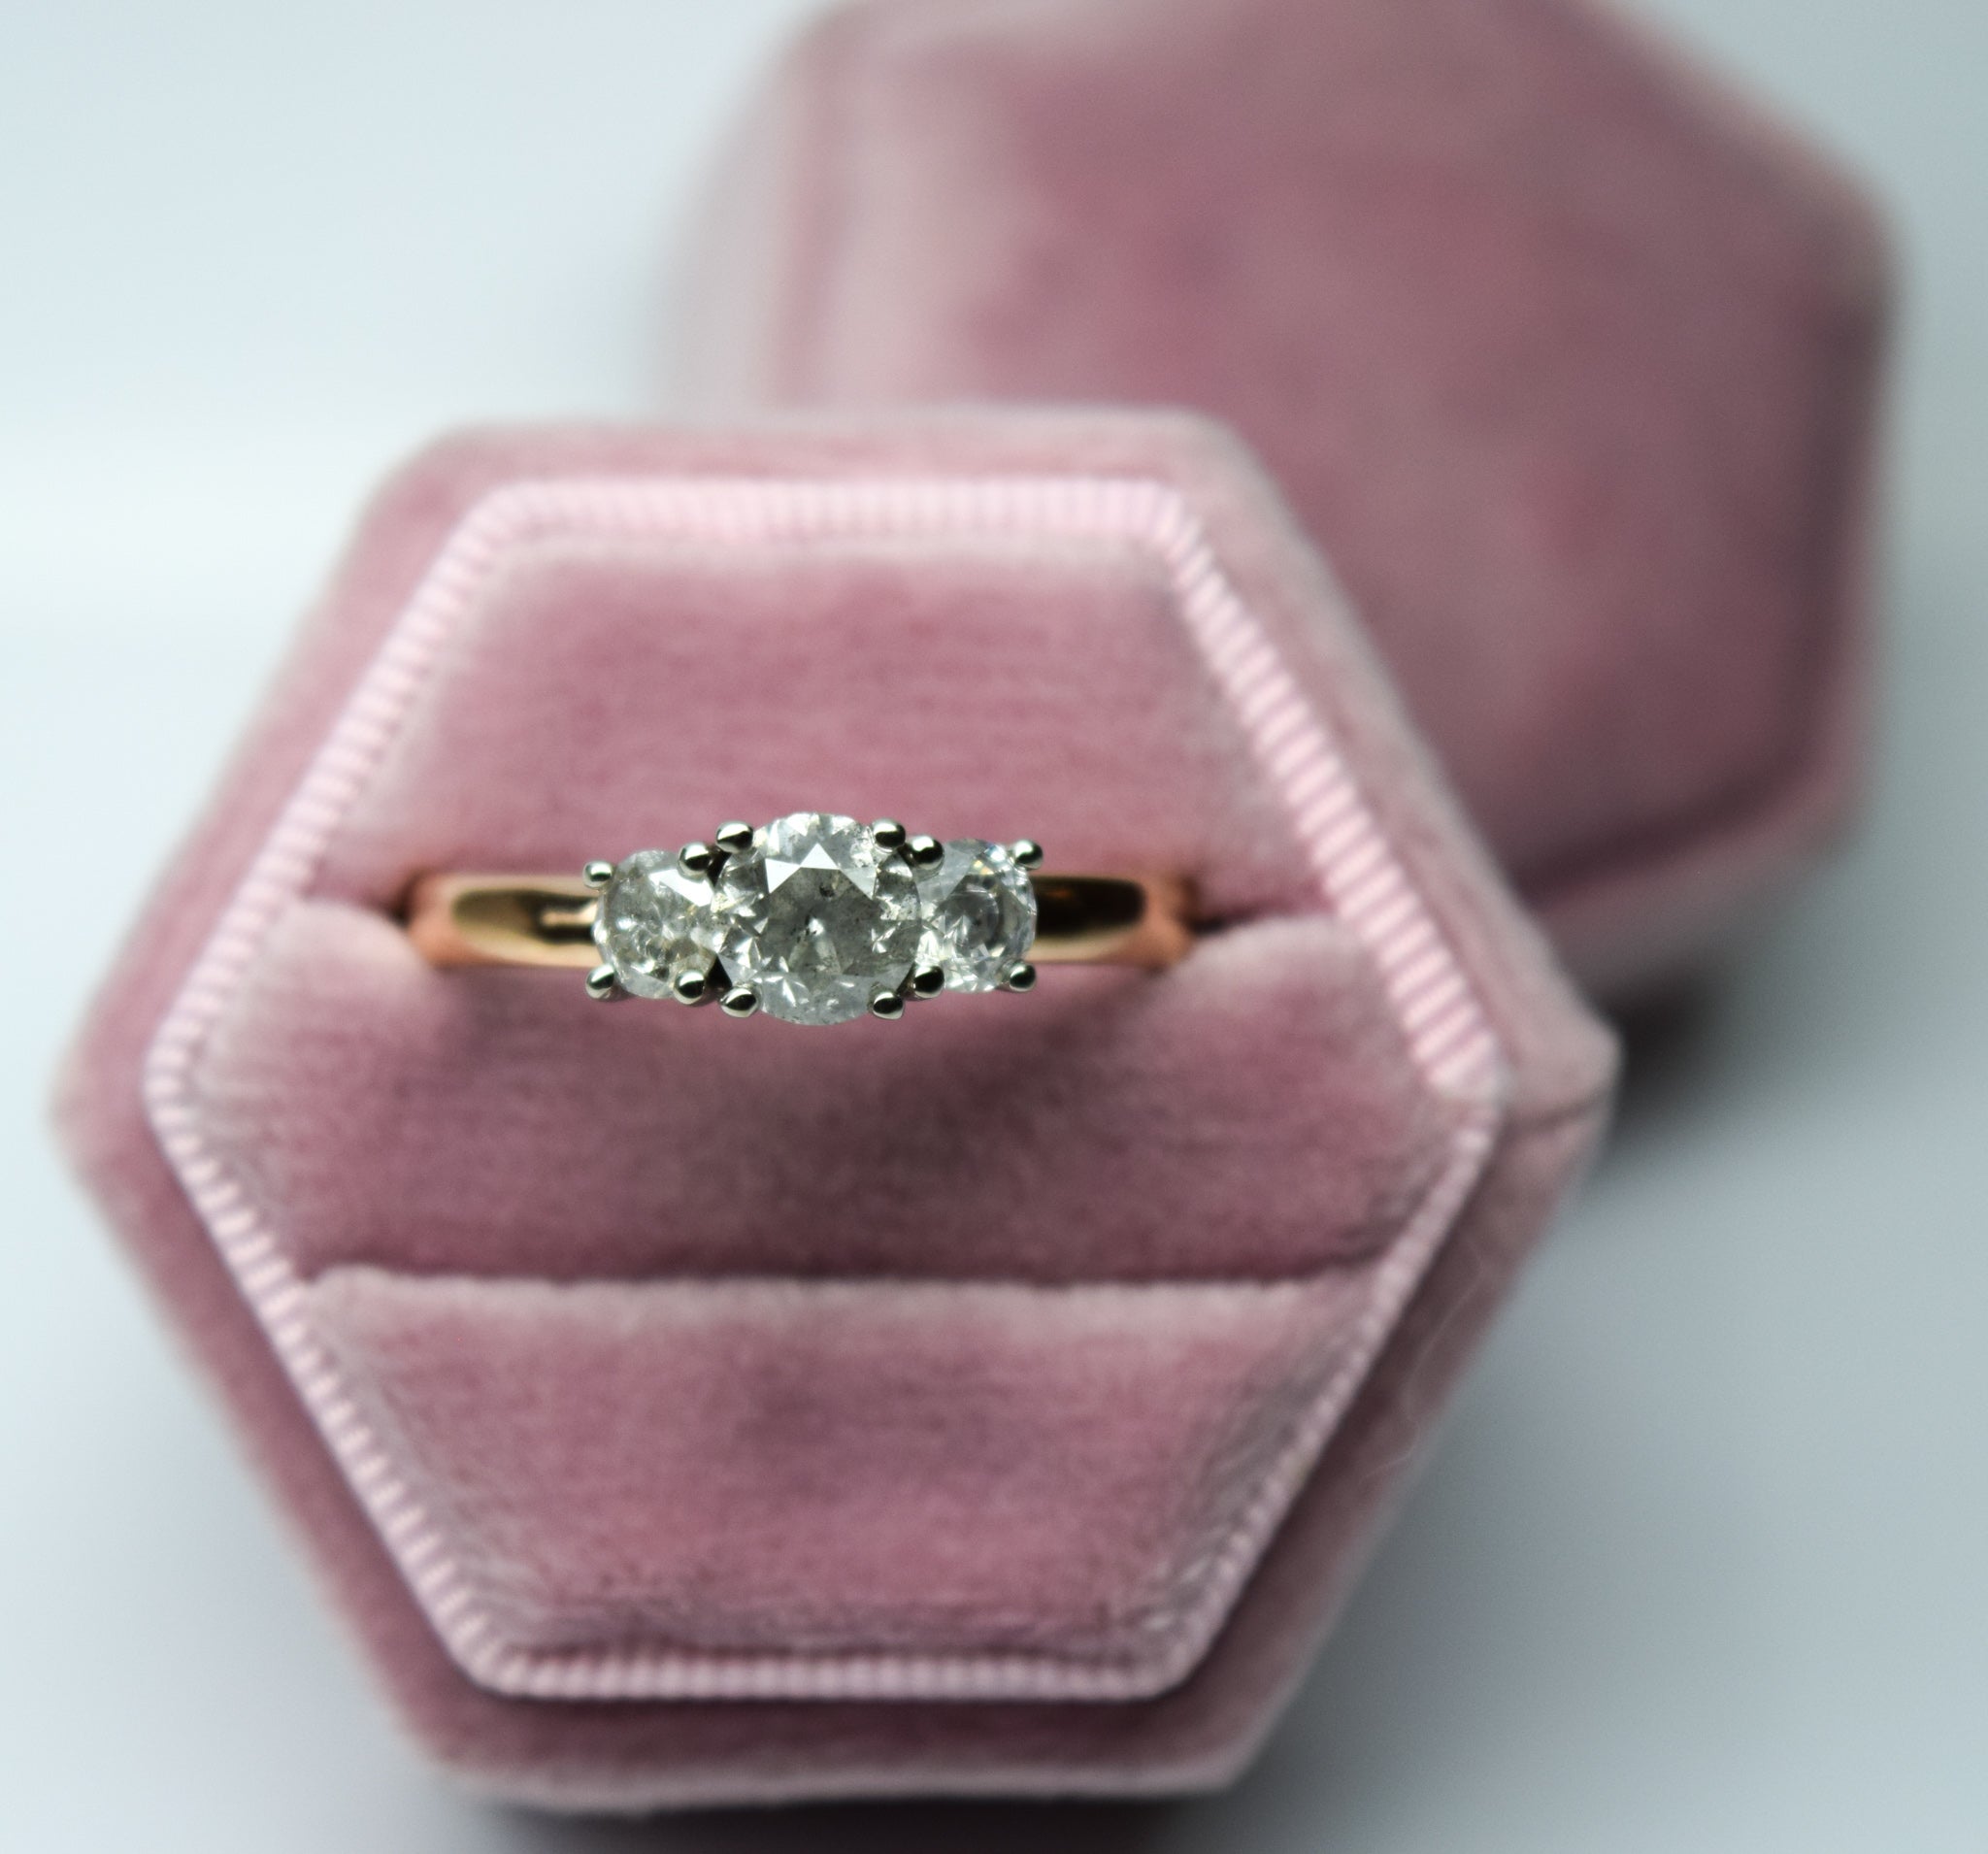 1ct total diamond weight engagement ring made in 14Kt rose gold and 14KT white gold.

Certificate of authenticity comes with purchase

ABOUT US
We are a family-owned business. Our studio in located in the heart of Boca Raton at the International